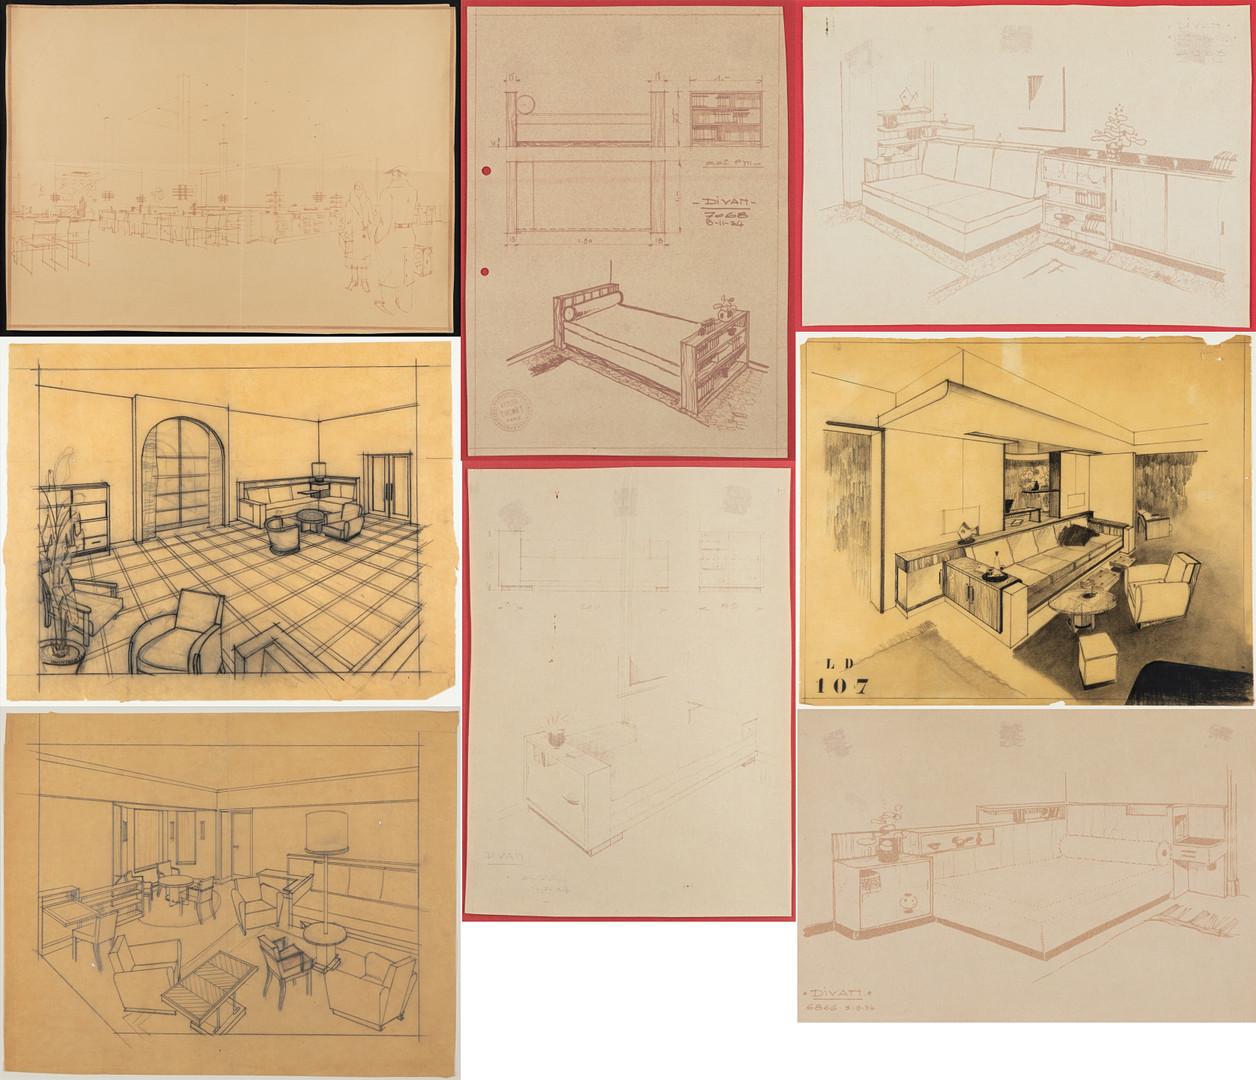 Atelier Thonet Paris, set of construction drawings and furnishing concepts, 1930s, (3-51).

Atelier Thonet Paris. Construction drawings and furnishing concepts.
1930s. 4x construction drawings, project name Divan. 

4x furnishing concepts.